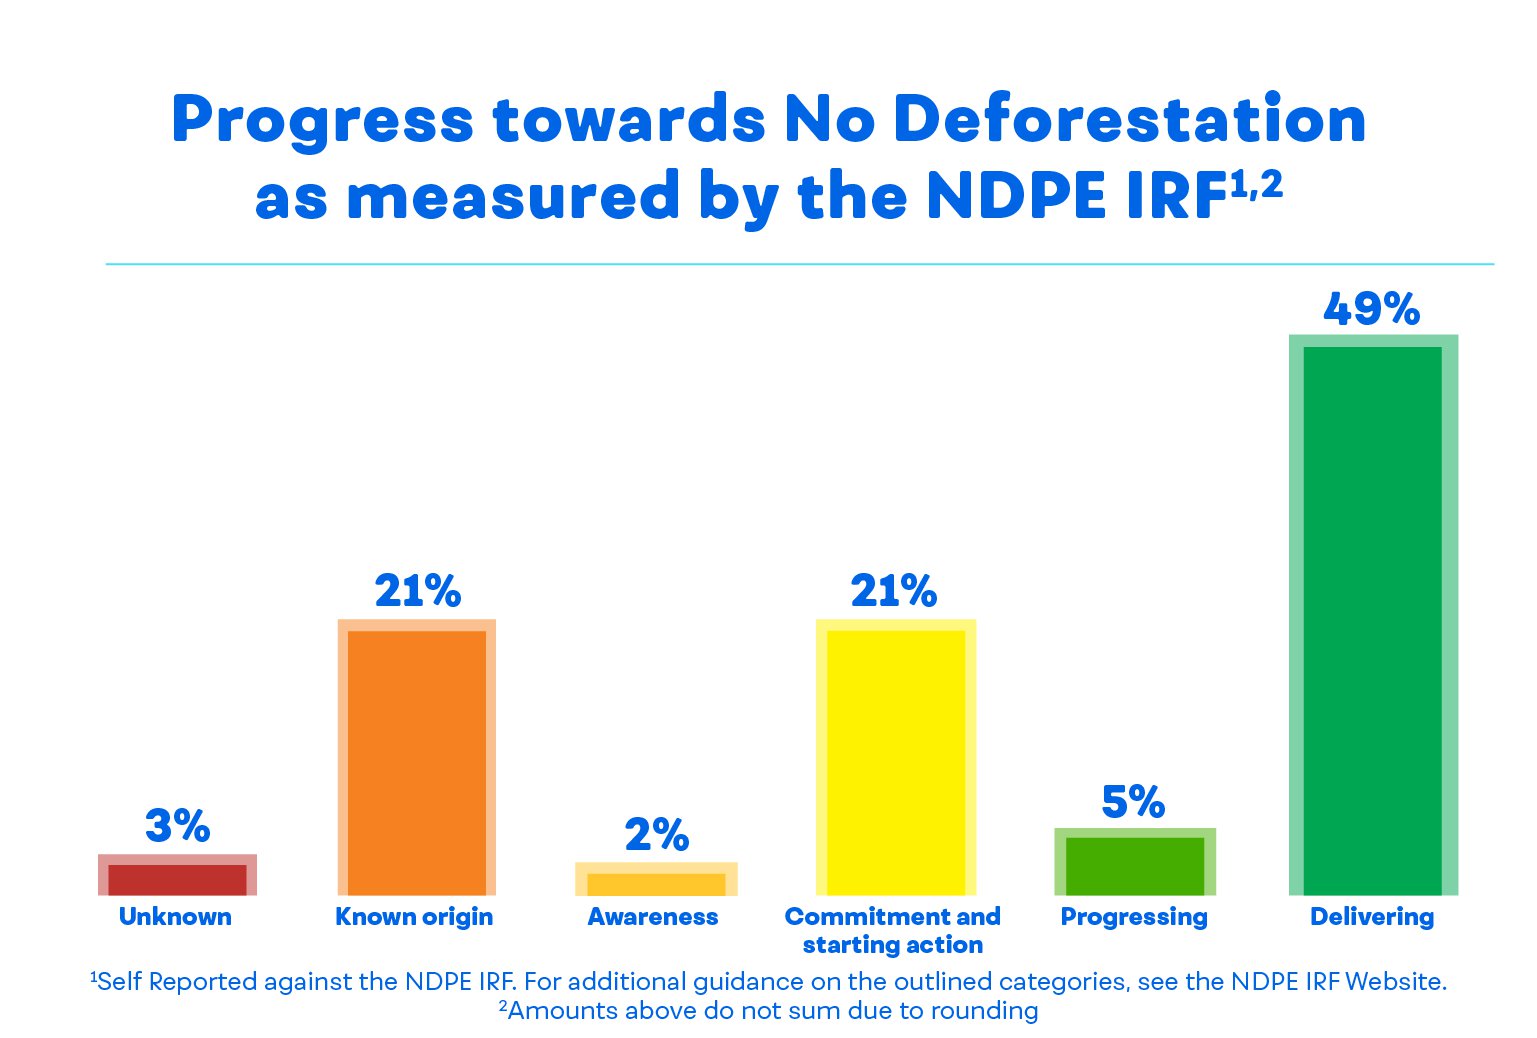 Progress towards No Deforestation as measured by the NDPE IRF*: 3% Unknown, 21% Known origin, 2% Awareness, 21% Commitment and starting action, 5% Progressing, 49% Delivering. *Amounts do not sum due to rounding